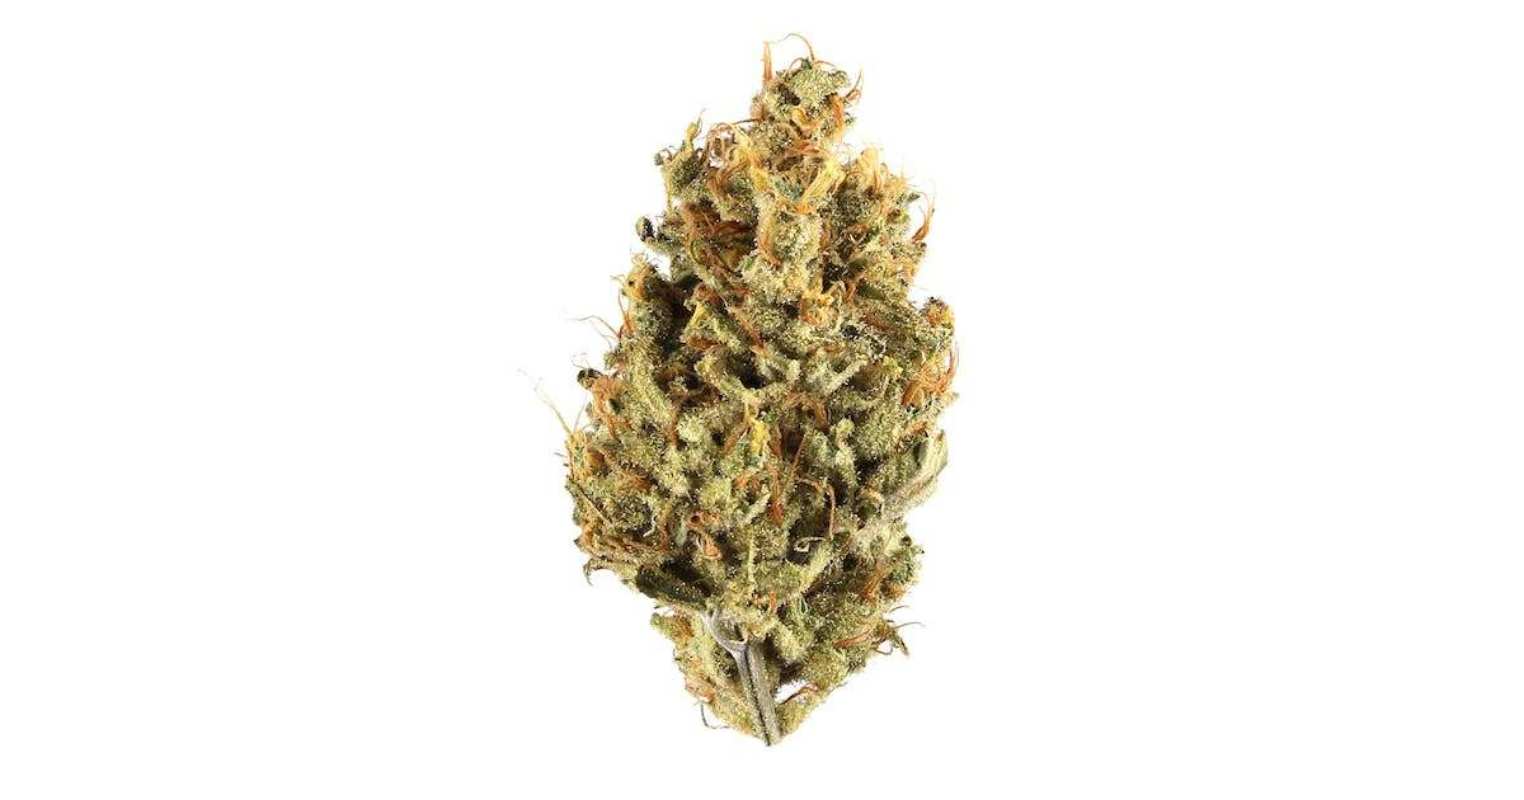 The Jungle Cake strain has a unique appearance that many people love. The buds are typically tiny to medium in size and have a dense, Indica-like structure. 